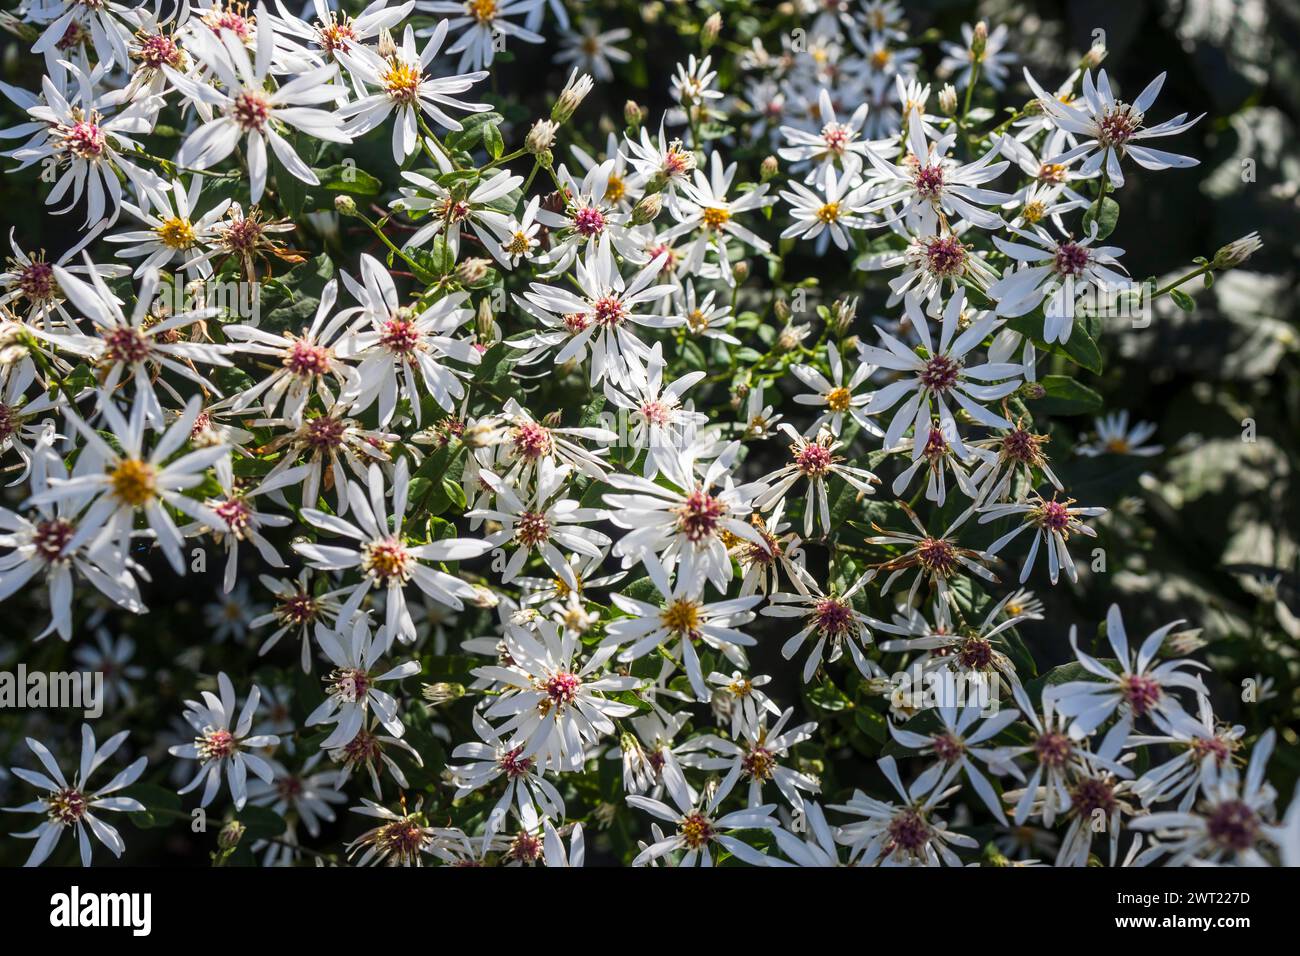 Eurybia divaricata, the white wood aster, is an herbaceous plant native to eastern North America. Stock Photo